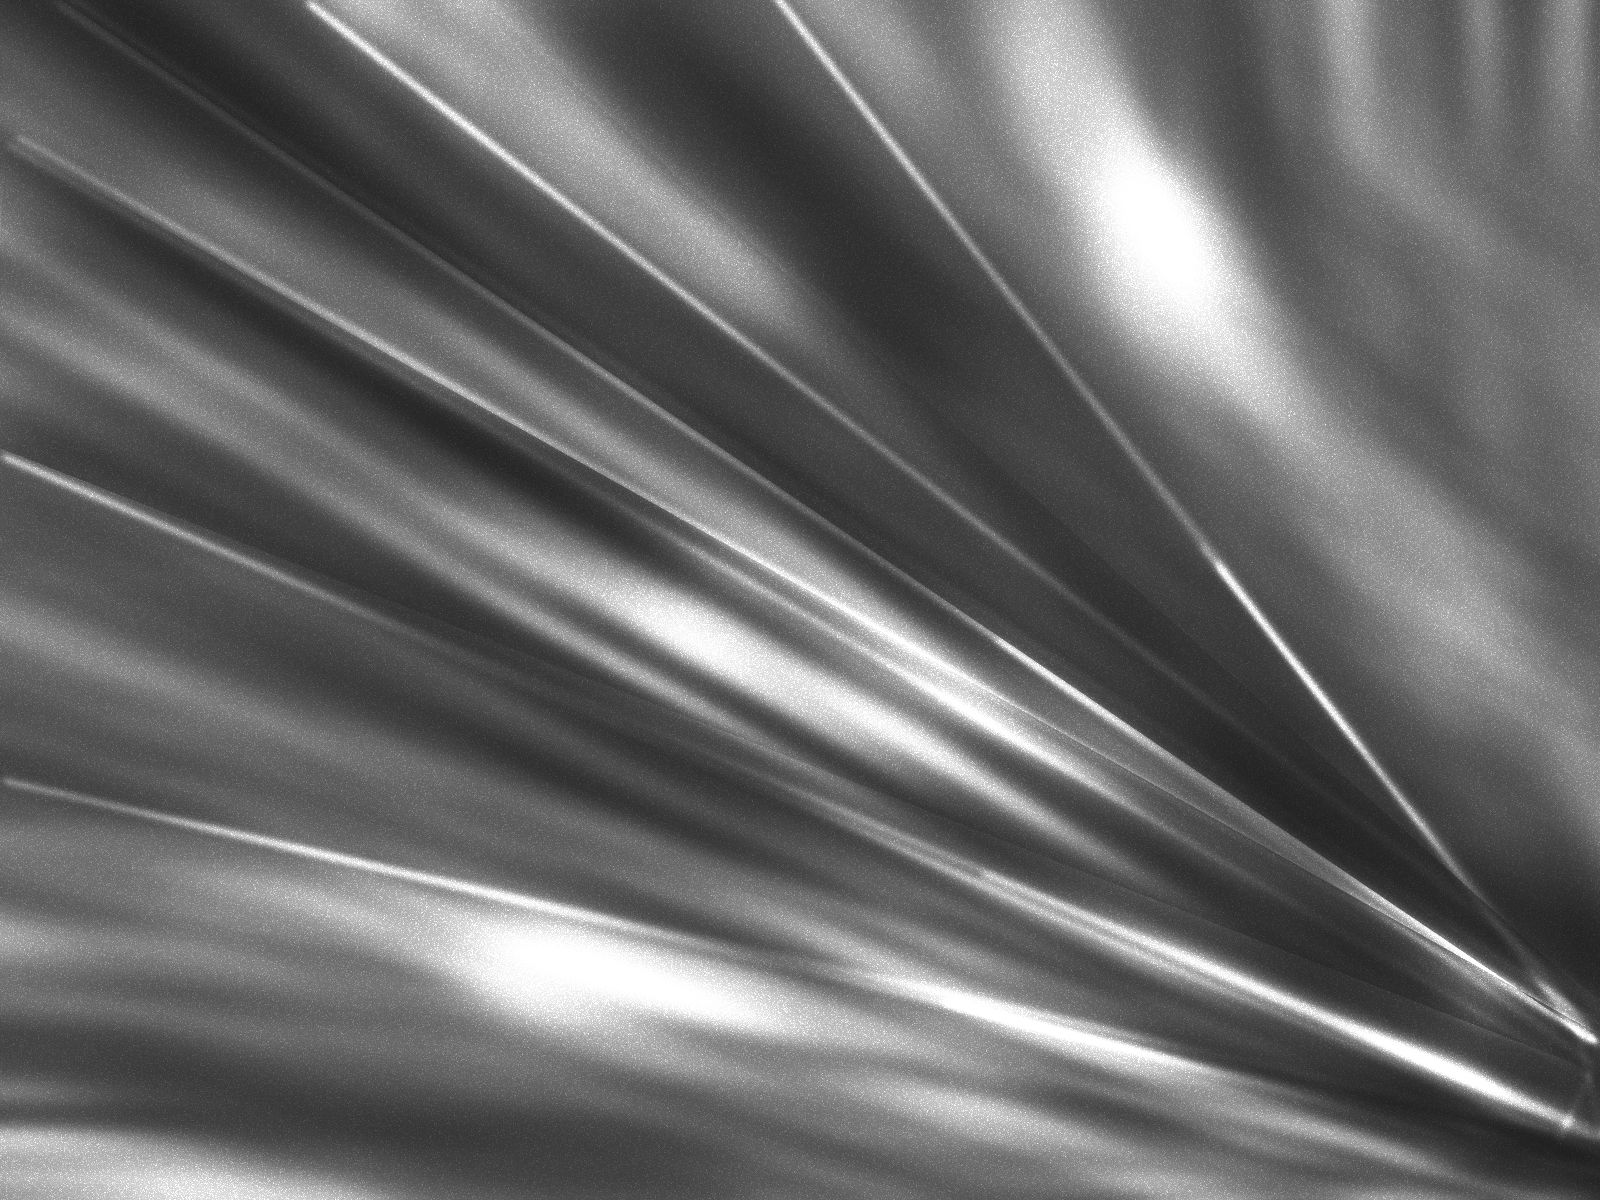 A black and white image of an abstract design - Silver